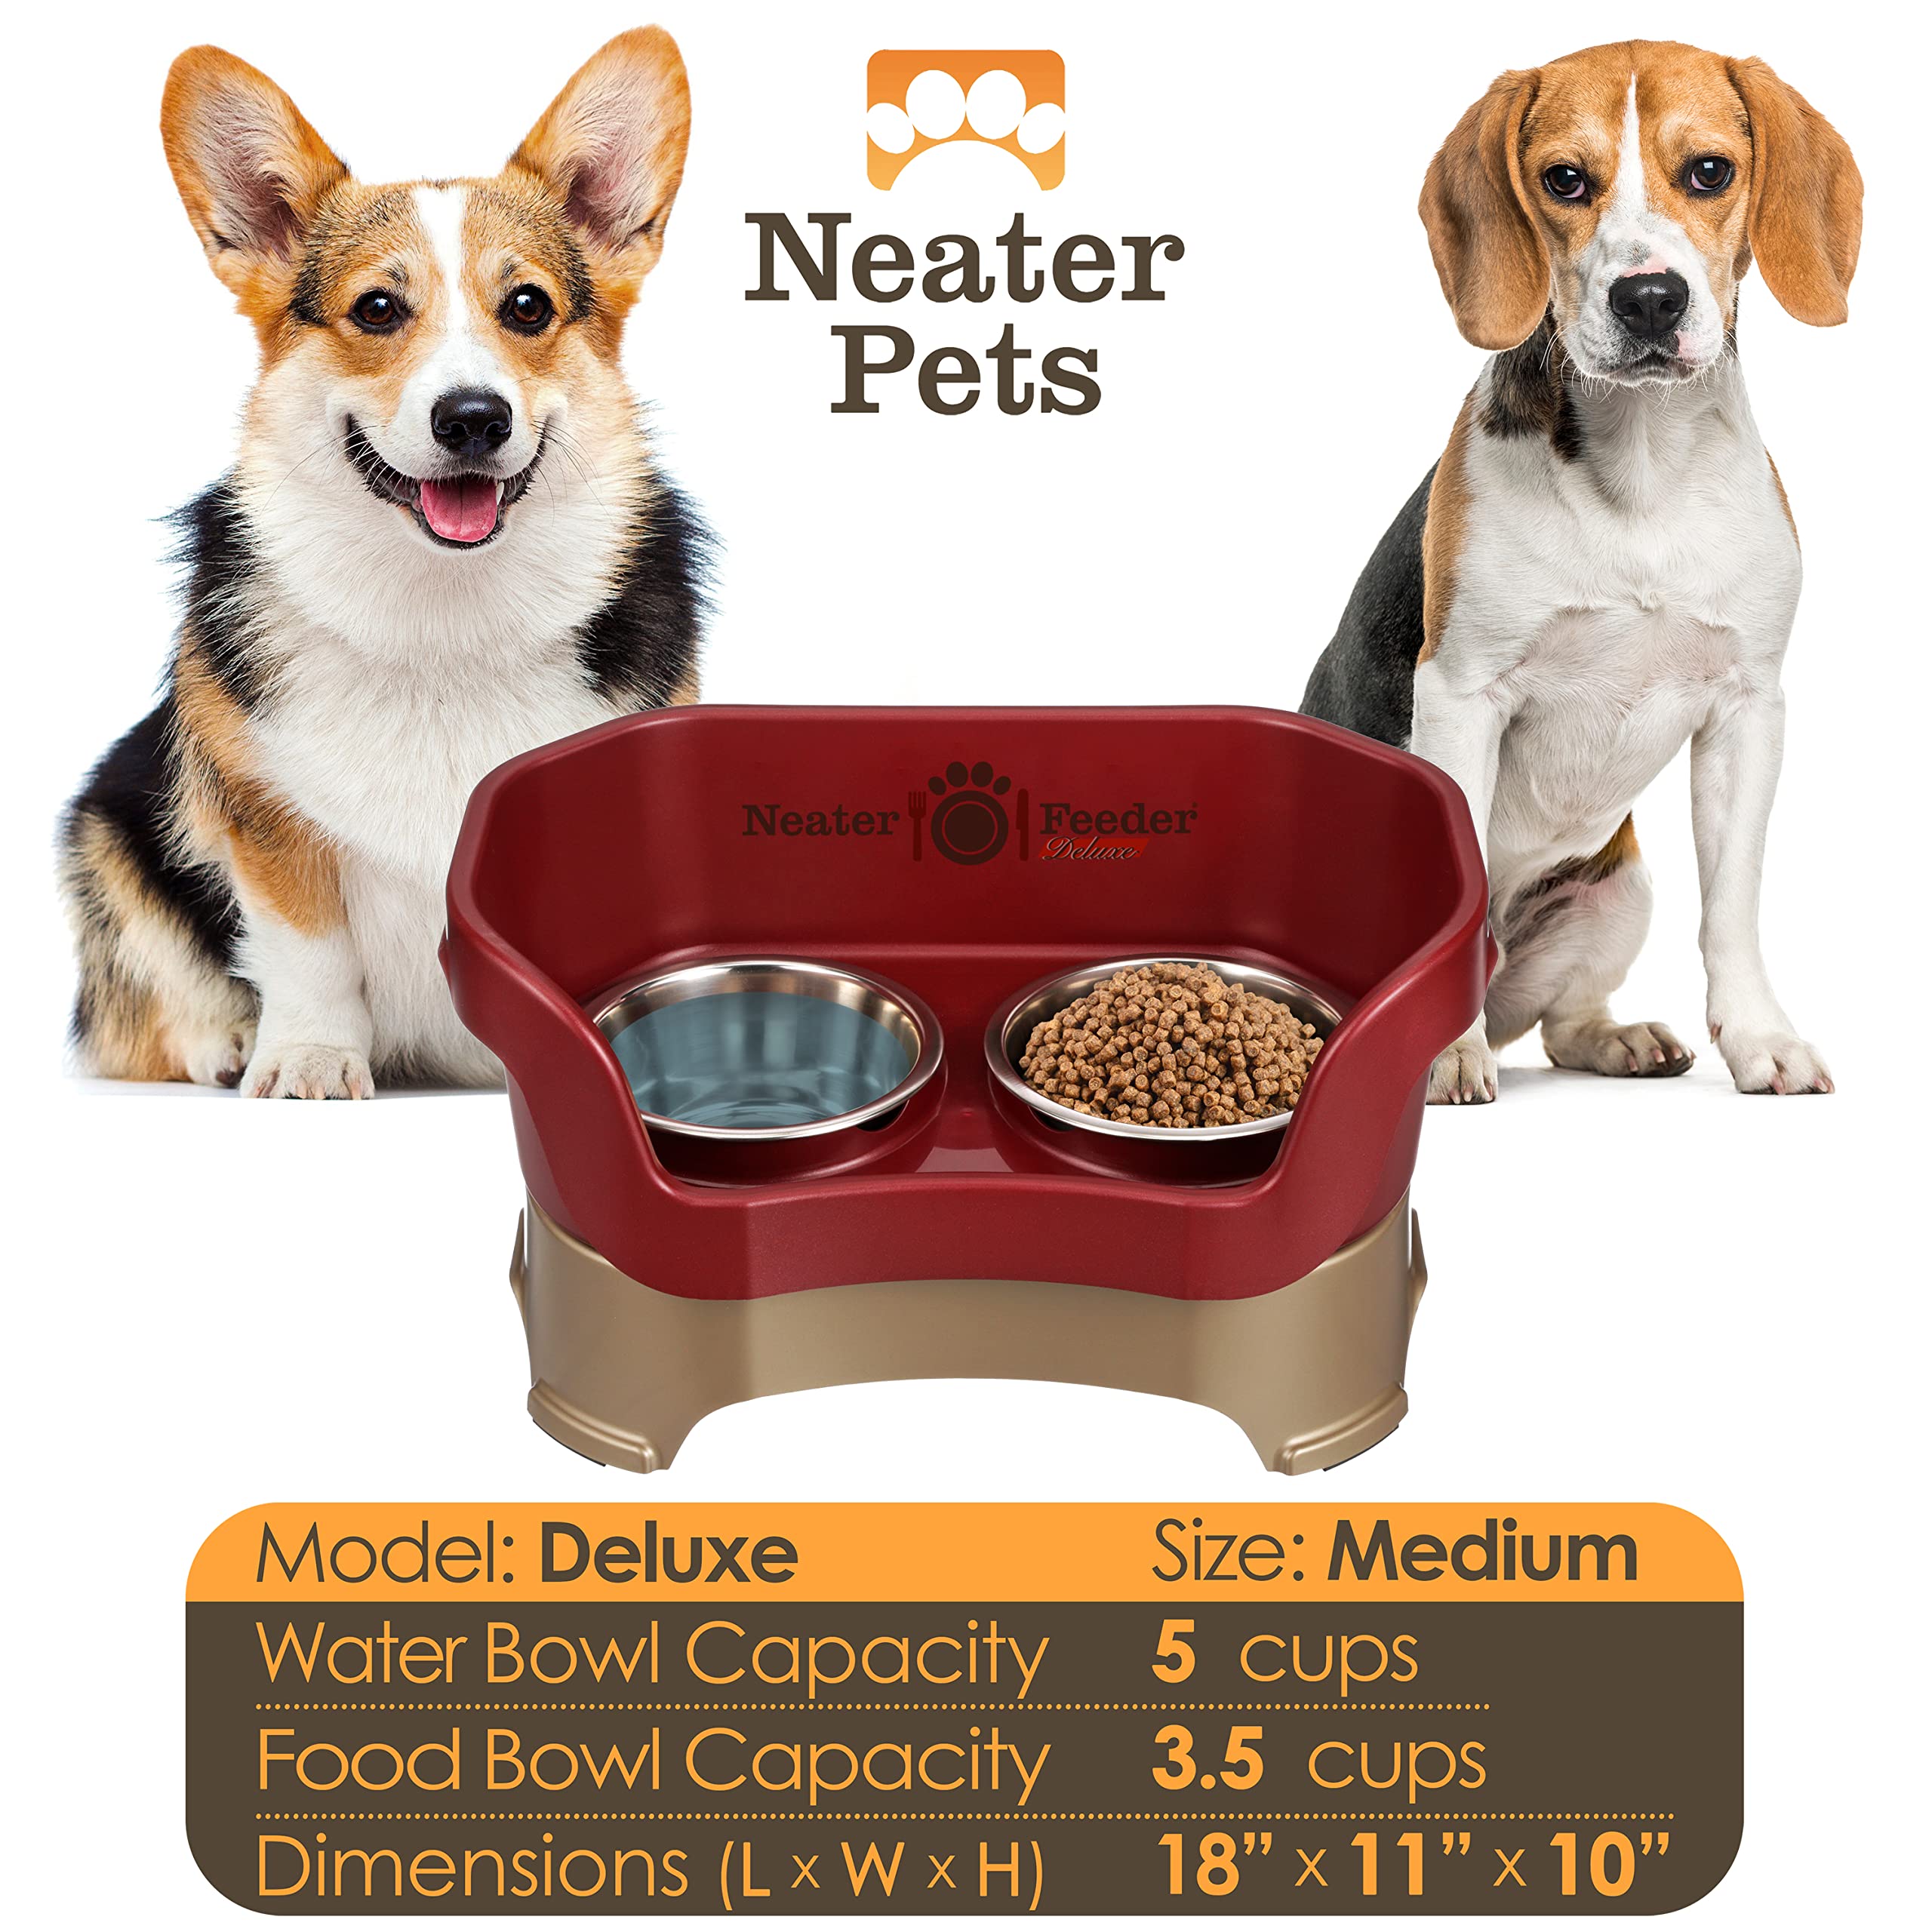 Neater Feeder Deluxe Medium Dog (Cranberry) - The Mess Proof Elevated Bowls No Slip Non Tip Double Diner Stainless Steel Food Dish with Stand